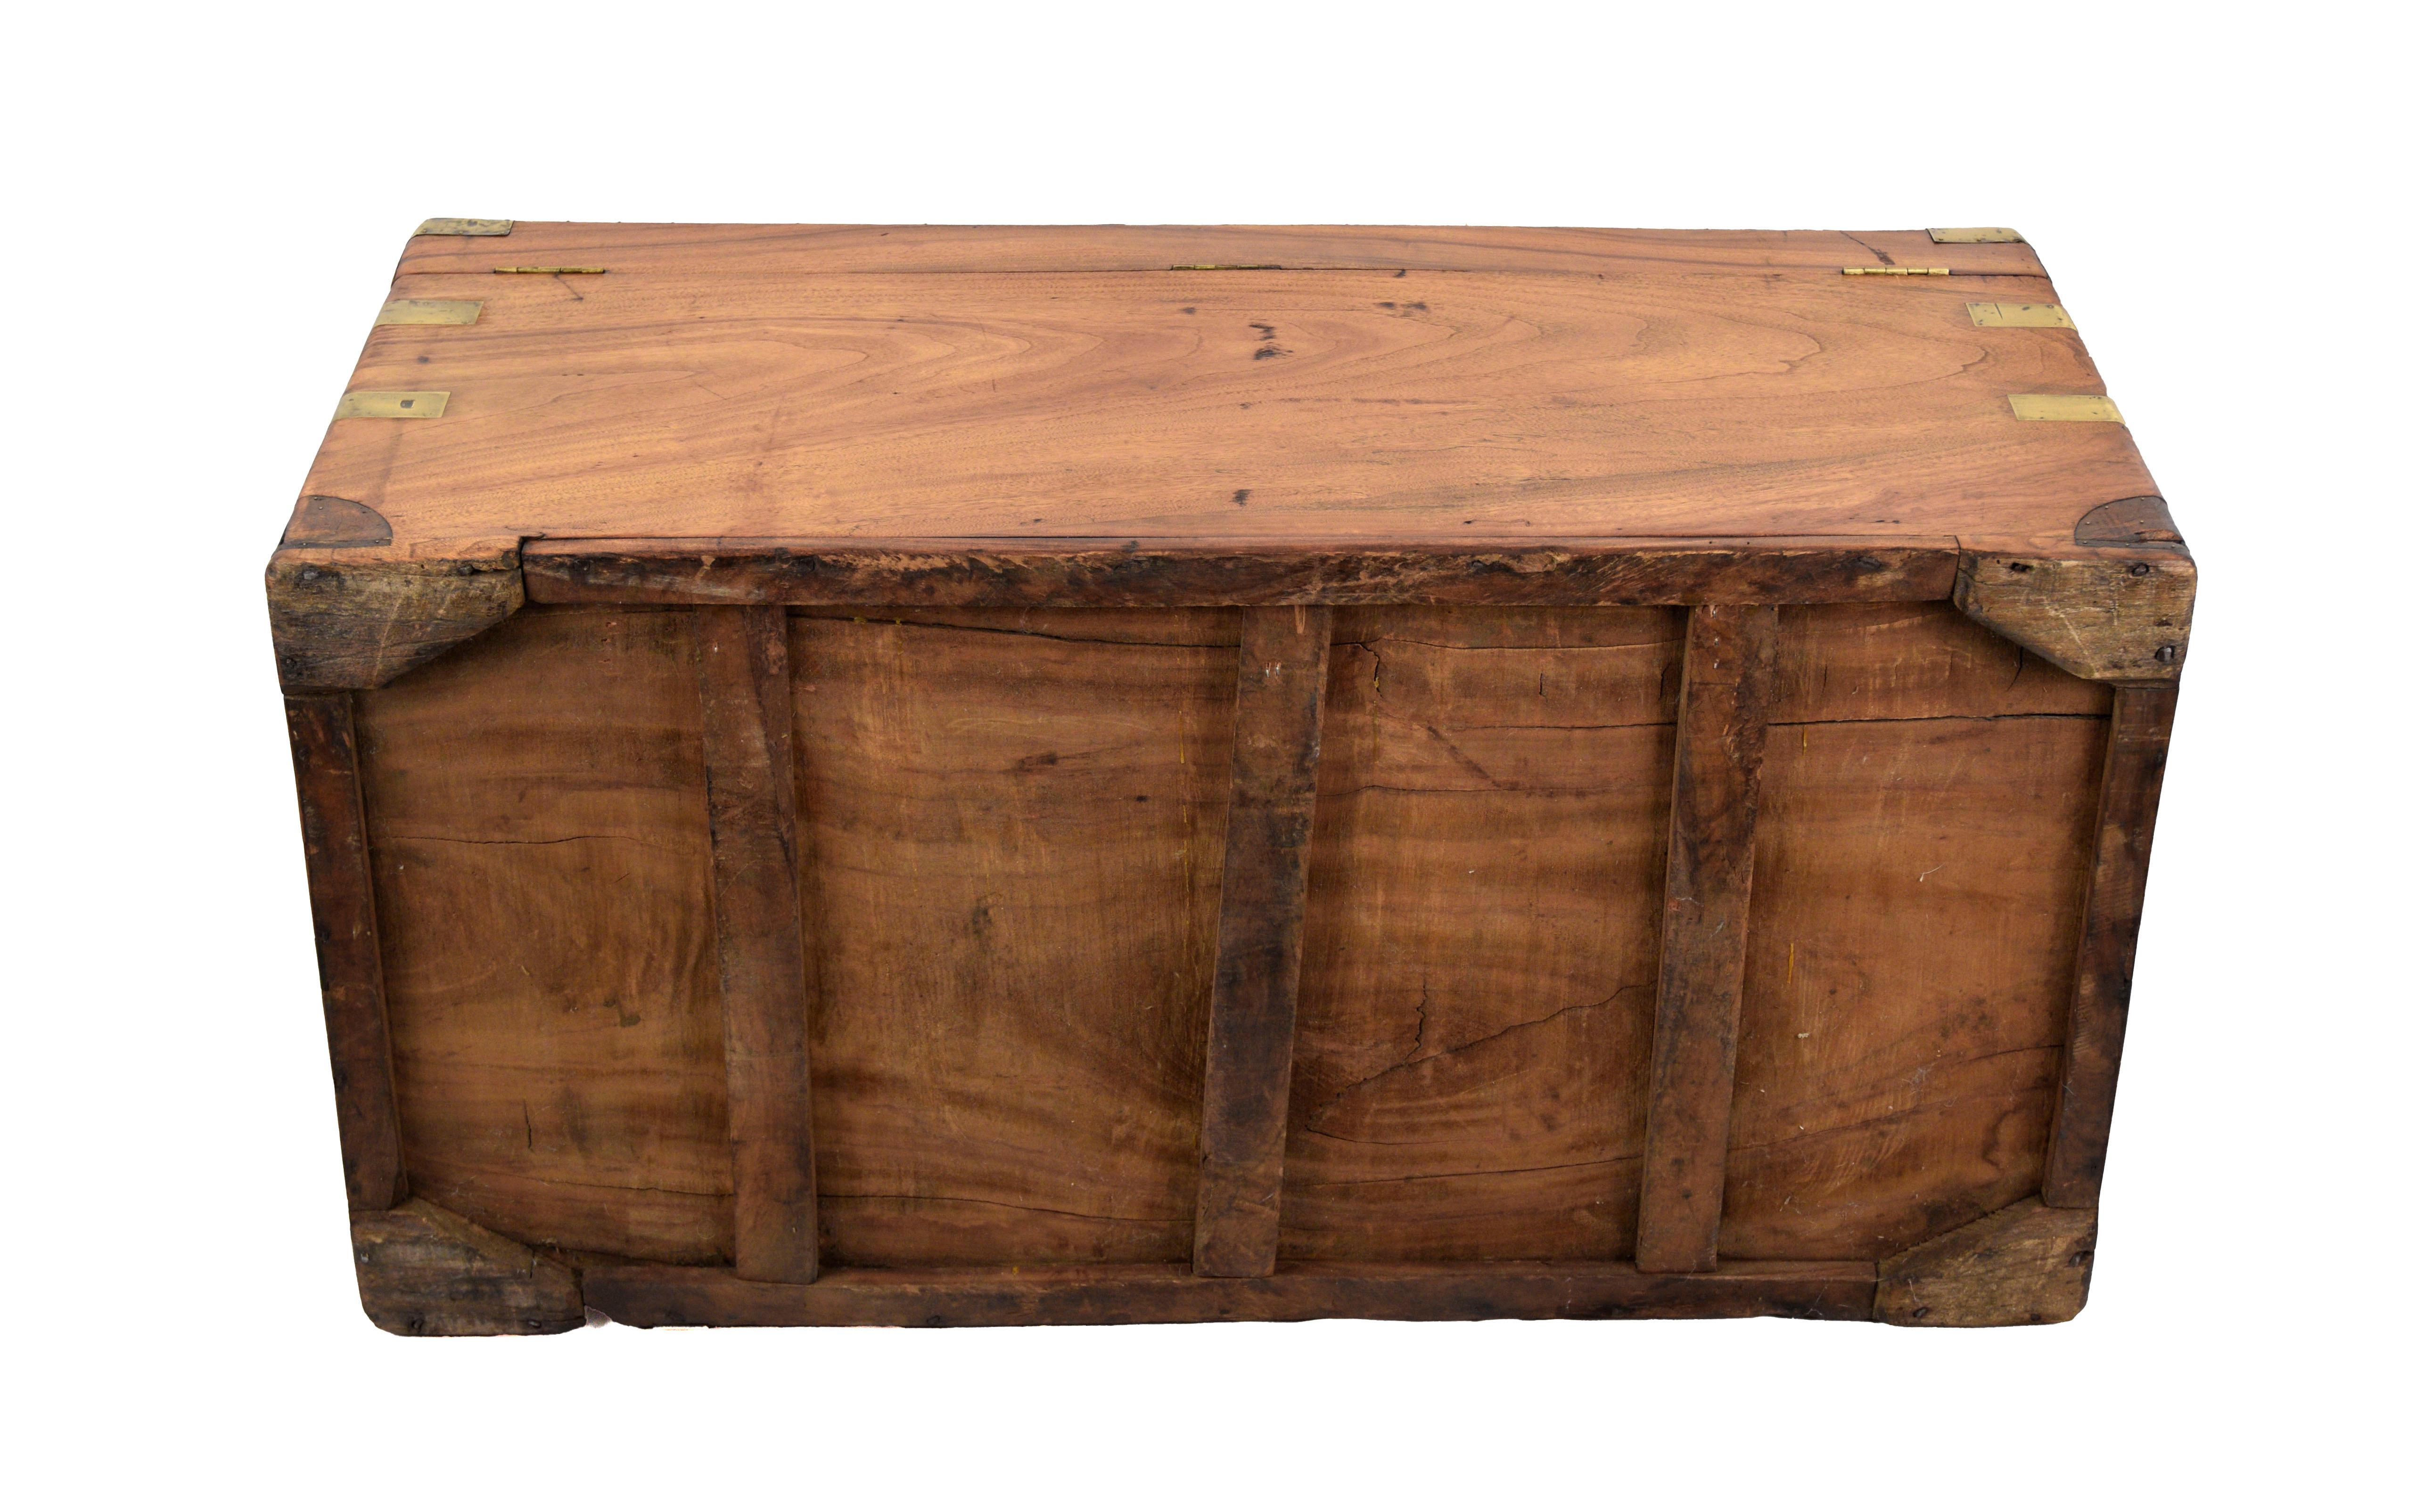 Camphorwood Campaign Chest - Late 19th Century Chinese Export R.B. Van Cleve, NY For Sale 4